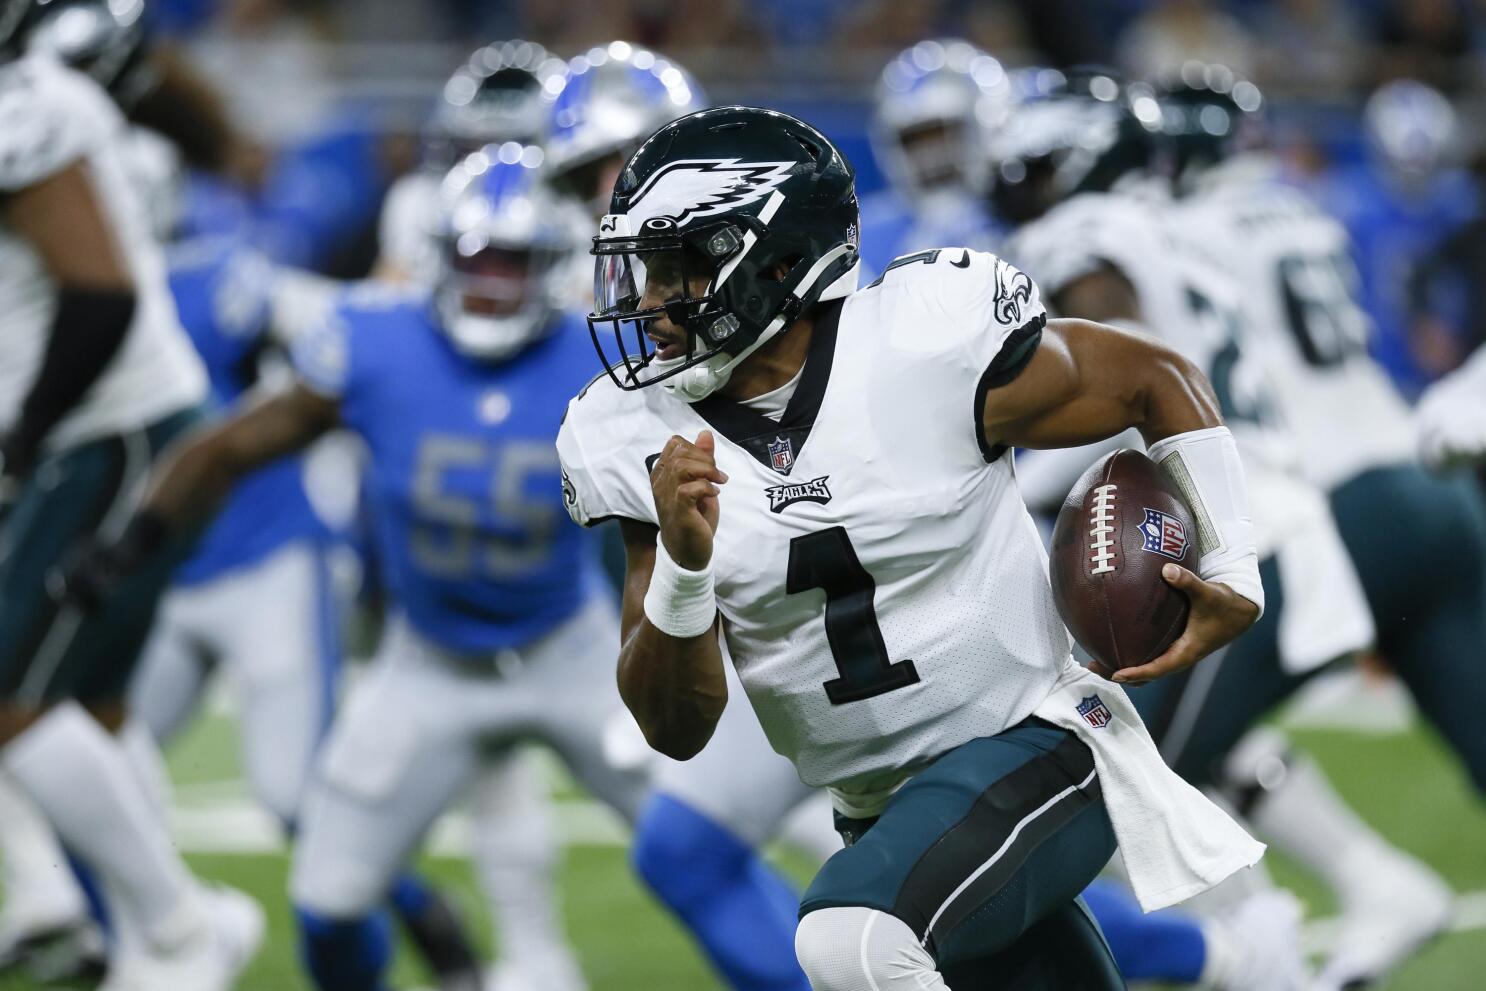 Jalen Hurts, Eagles too much for Lions in opener 38-35